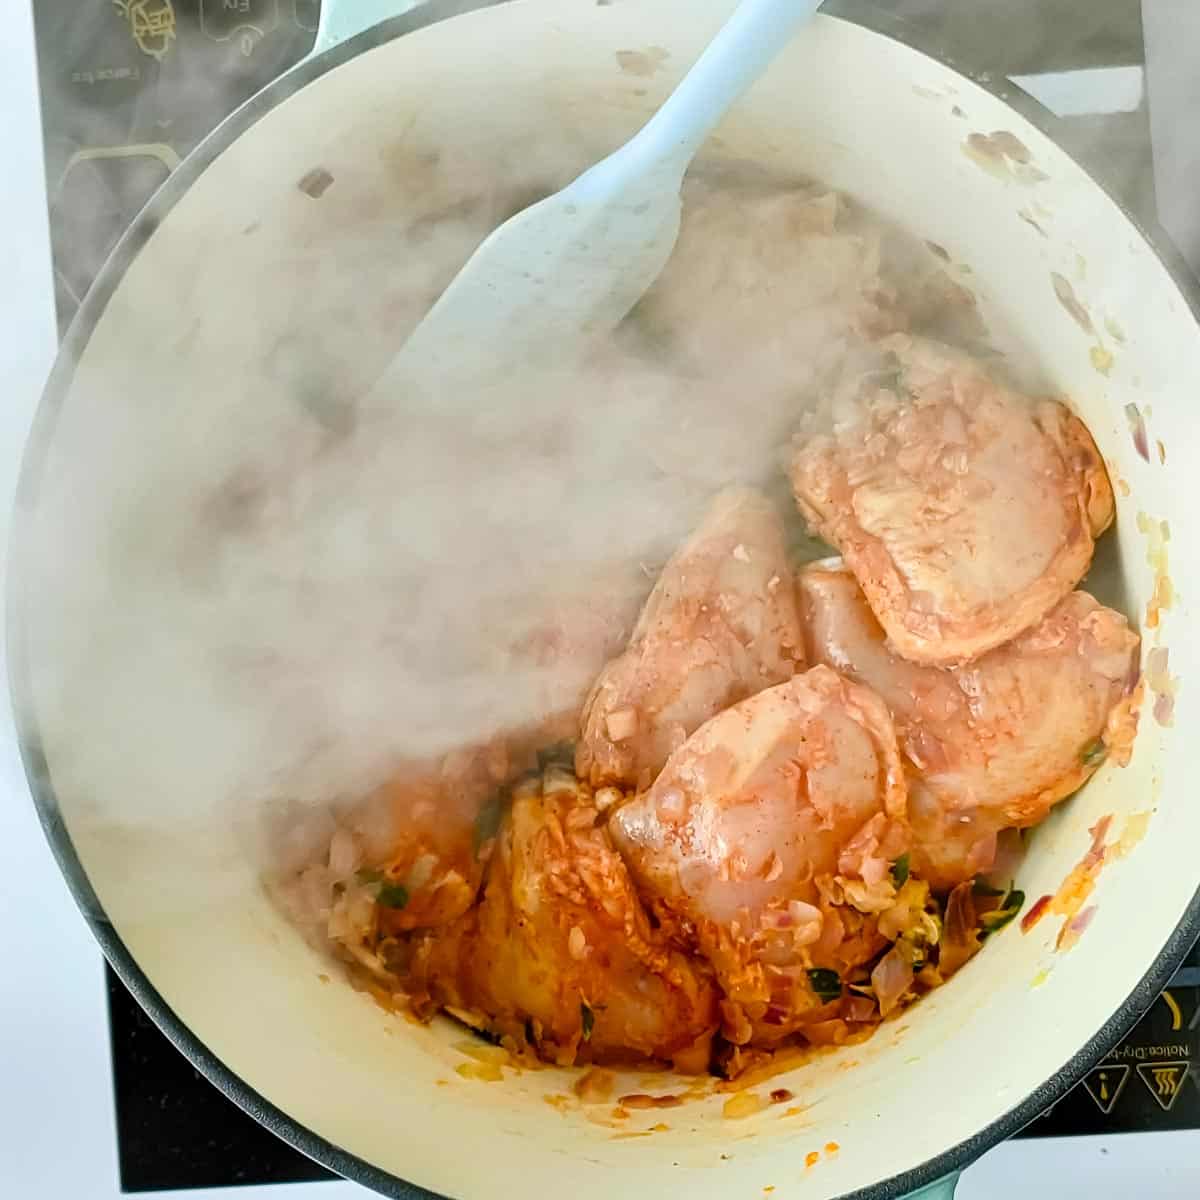 Chicken being sauteed in a cooking pot for Kerala chicken curry.